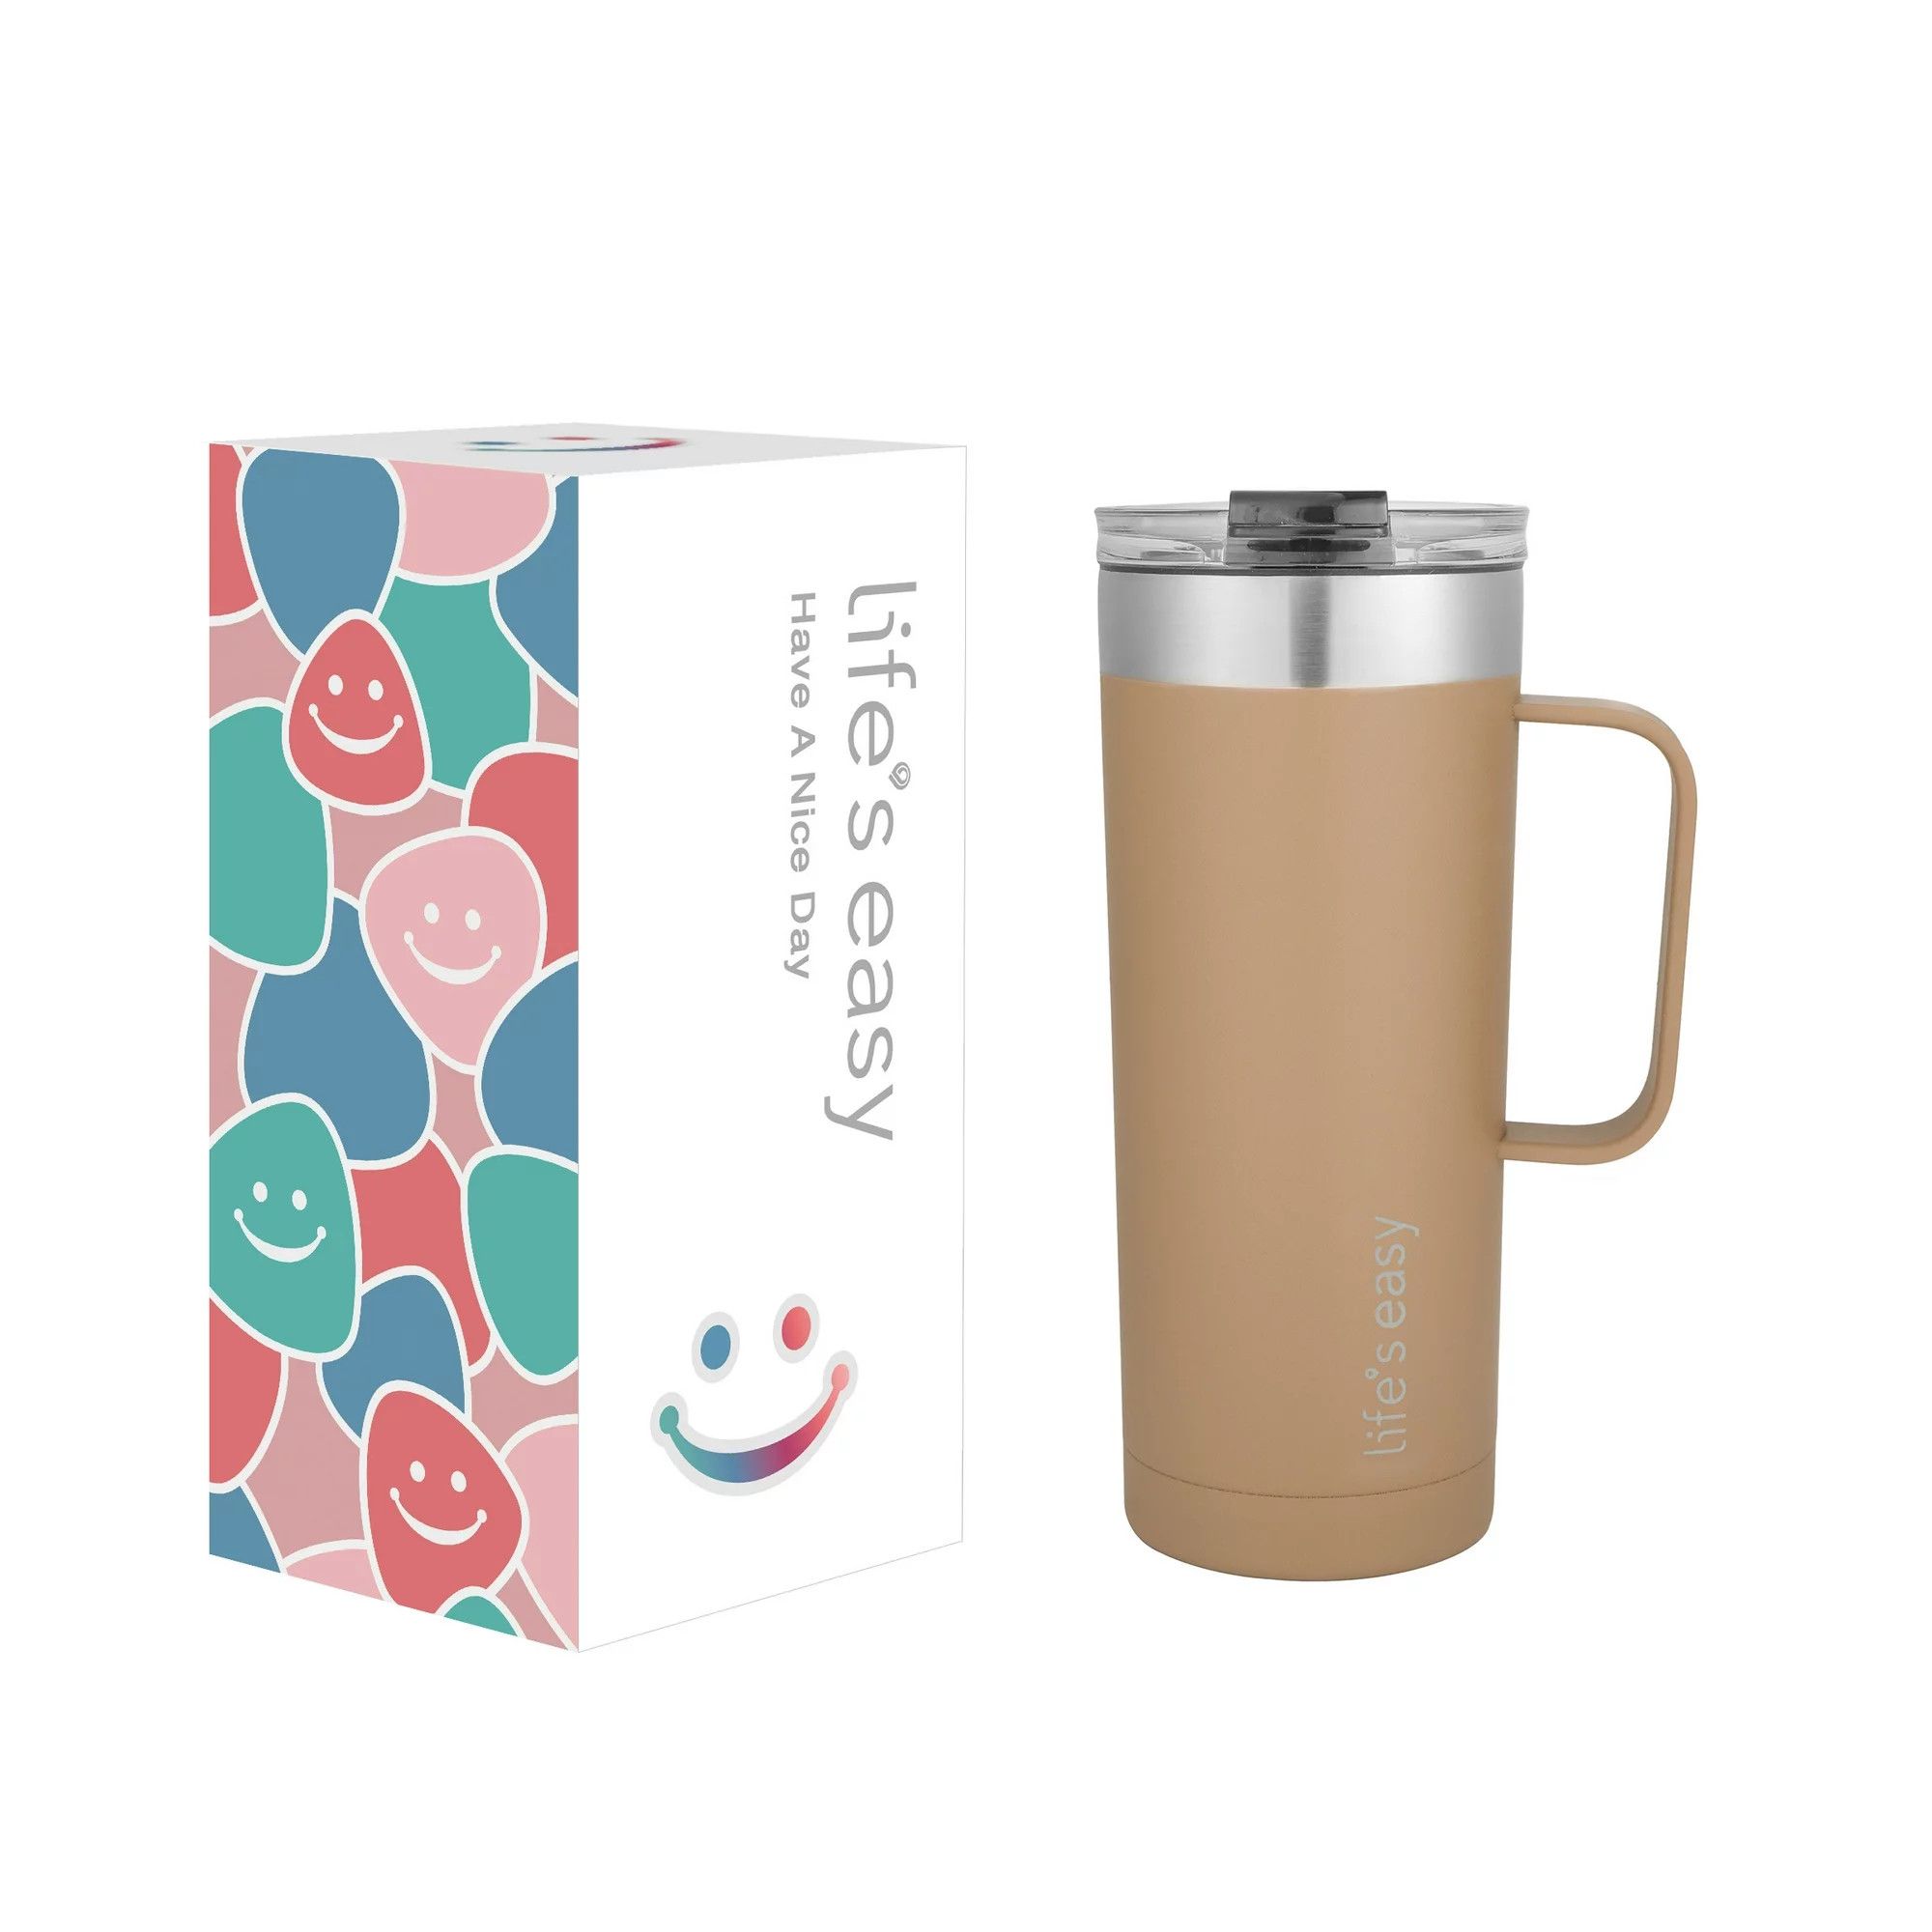 Life’s Easy - Stainless Steel Mug with Handle, Vacuum Insulated Mug for Hot and Cold Drink, Lea... | Walmart (US)